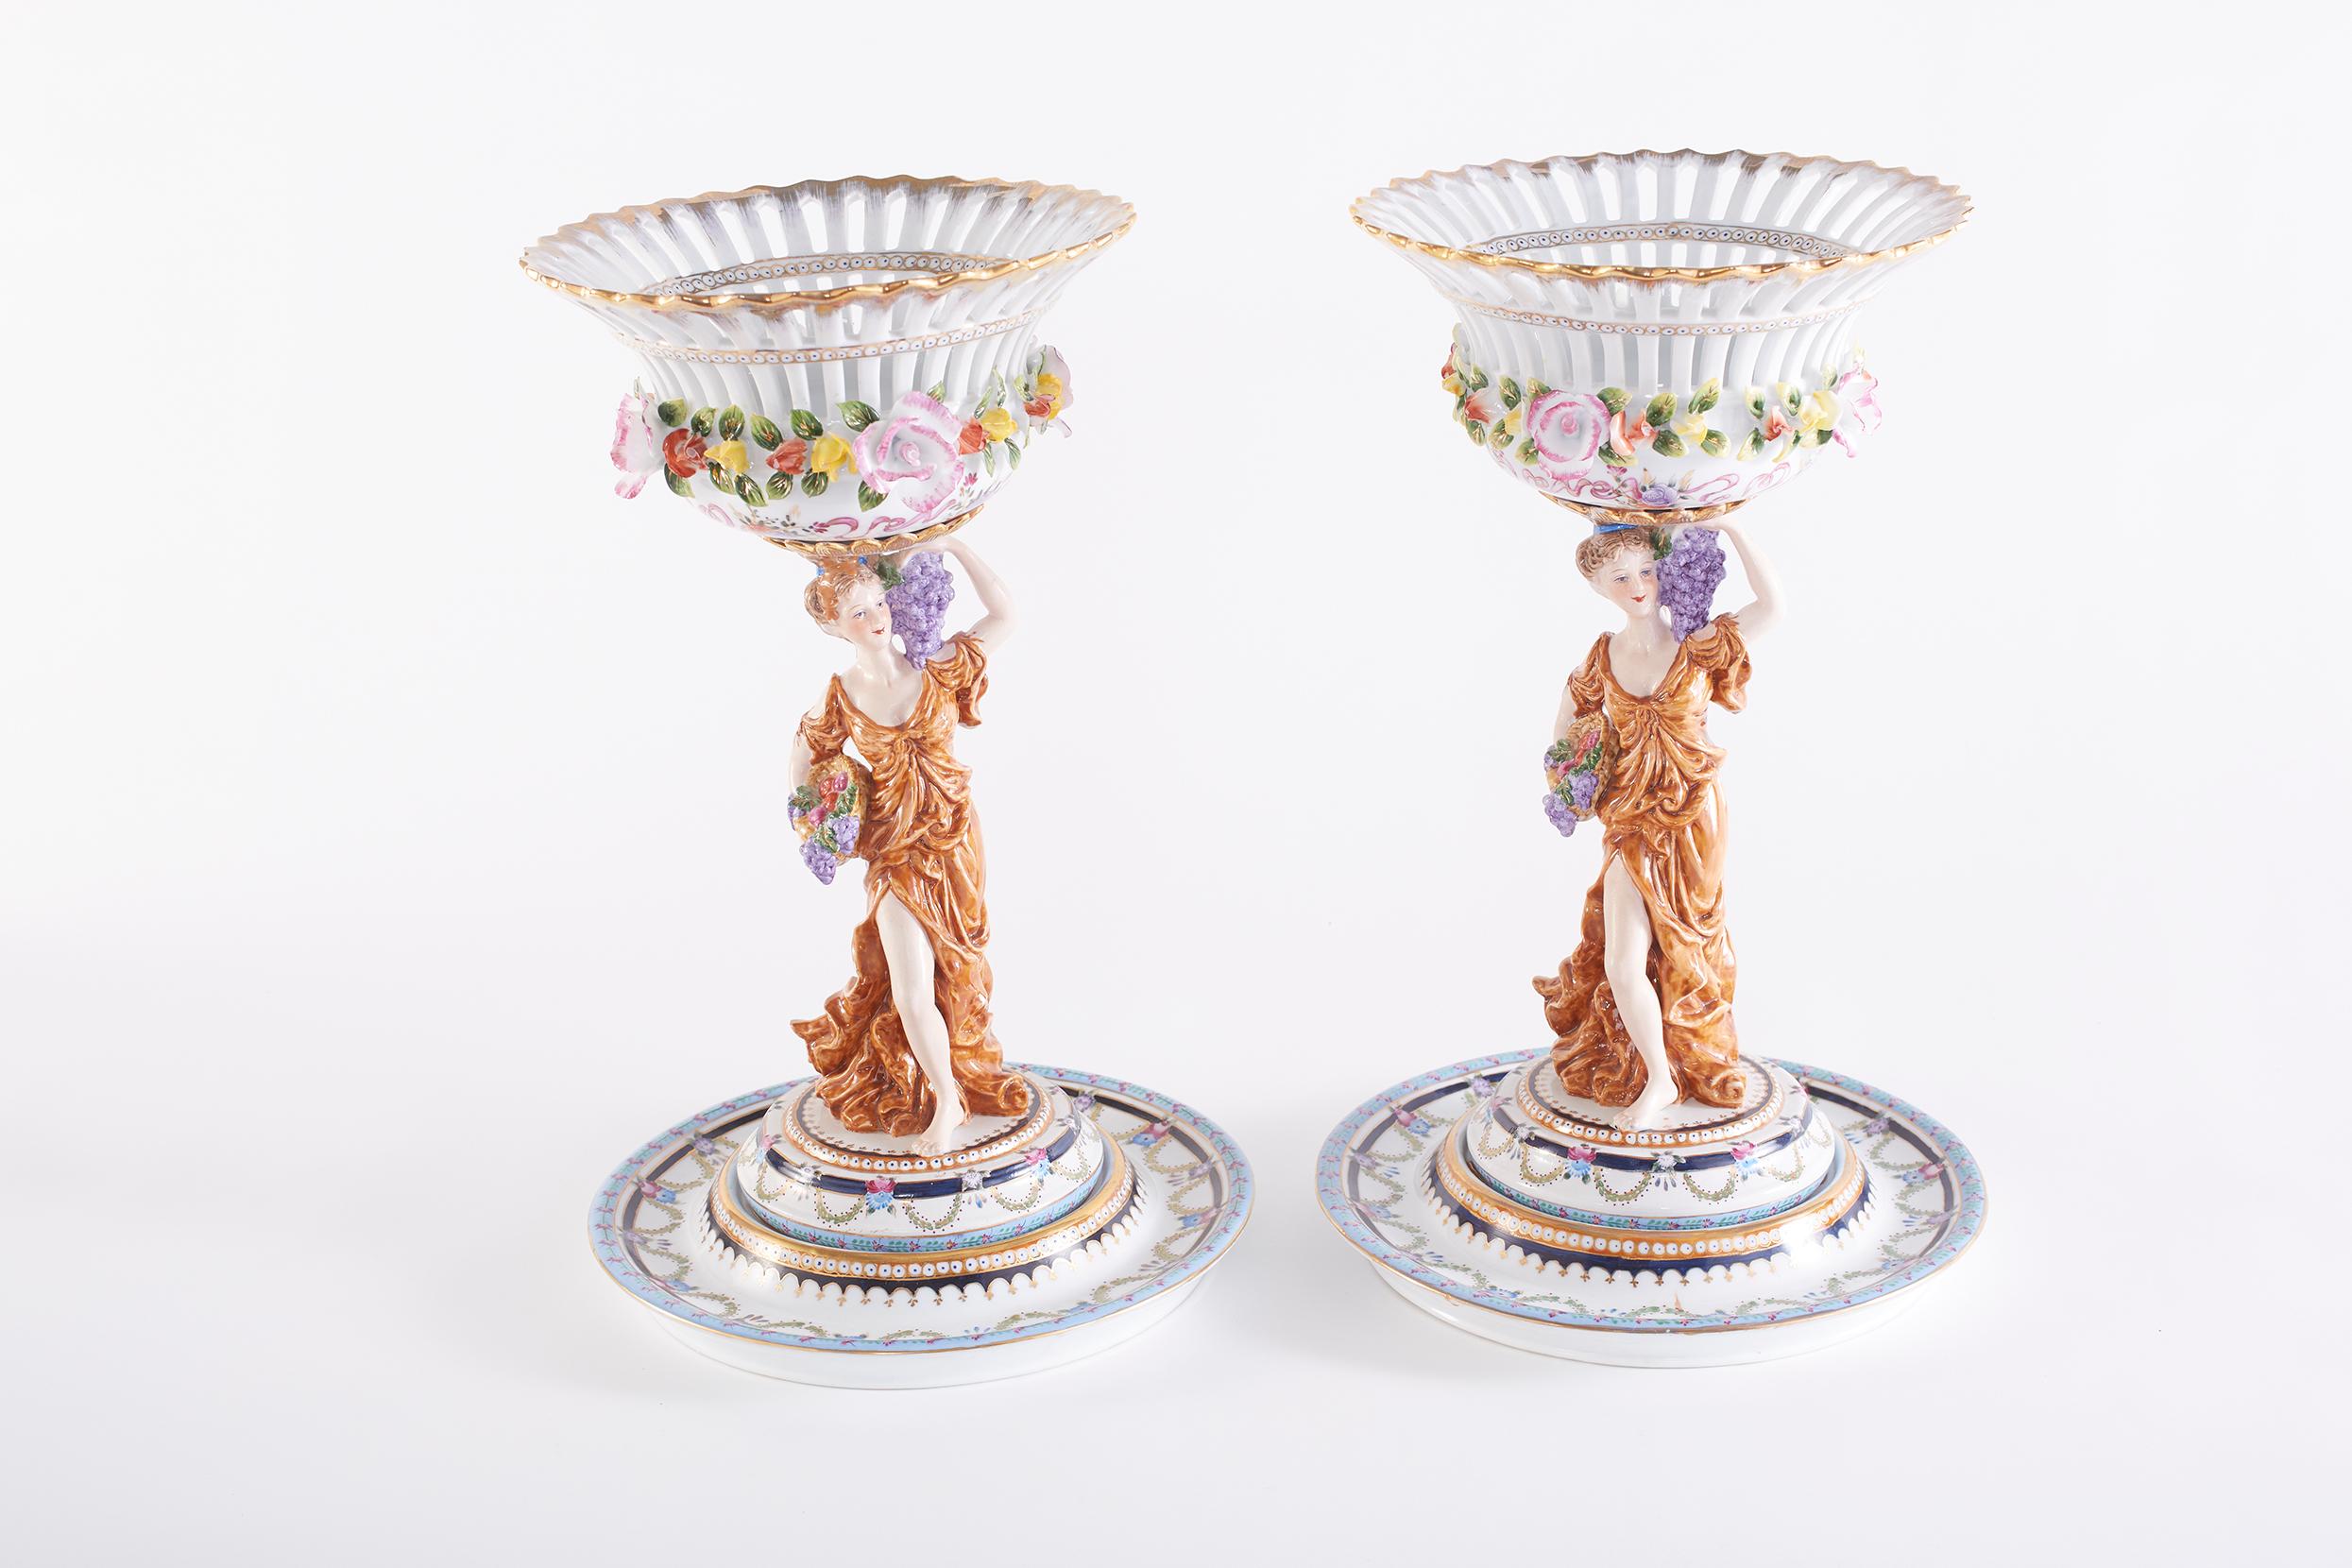 Pair gilt gold and glazed porcelain Limoges decorative tableware pieces with interior / exterior painted design details. Each piece is in great condition. Minor wear consistent with age / use. Maker's mark undersigned. Each piece stands about 18